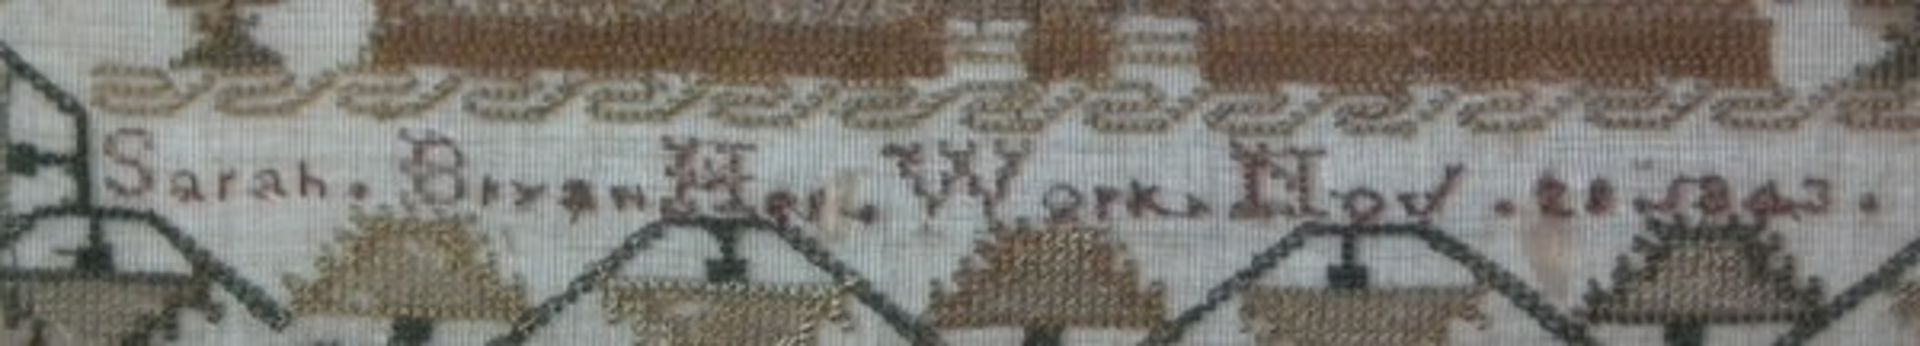 Needlework School Sampler dated 1843 by Sarah Bryan FREE UK DELIVERY - Image 8 of 38